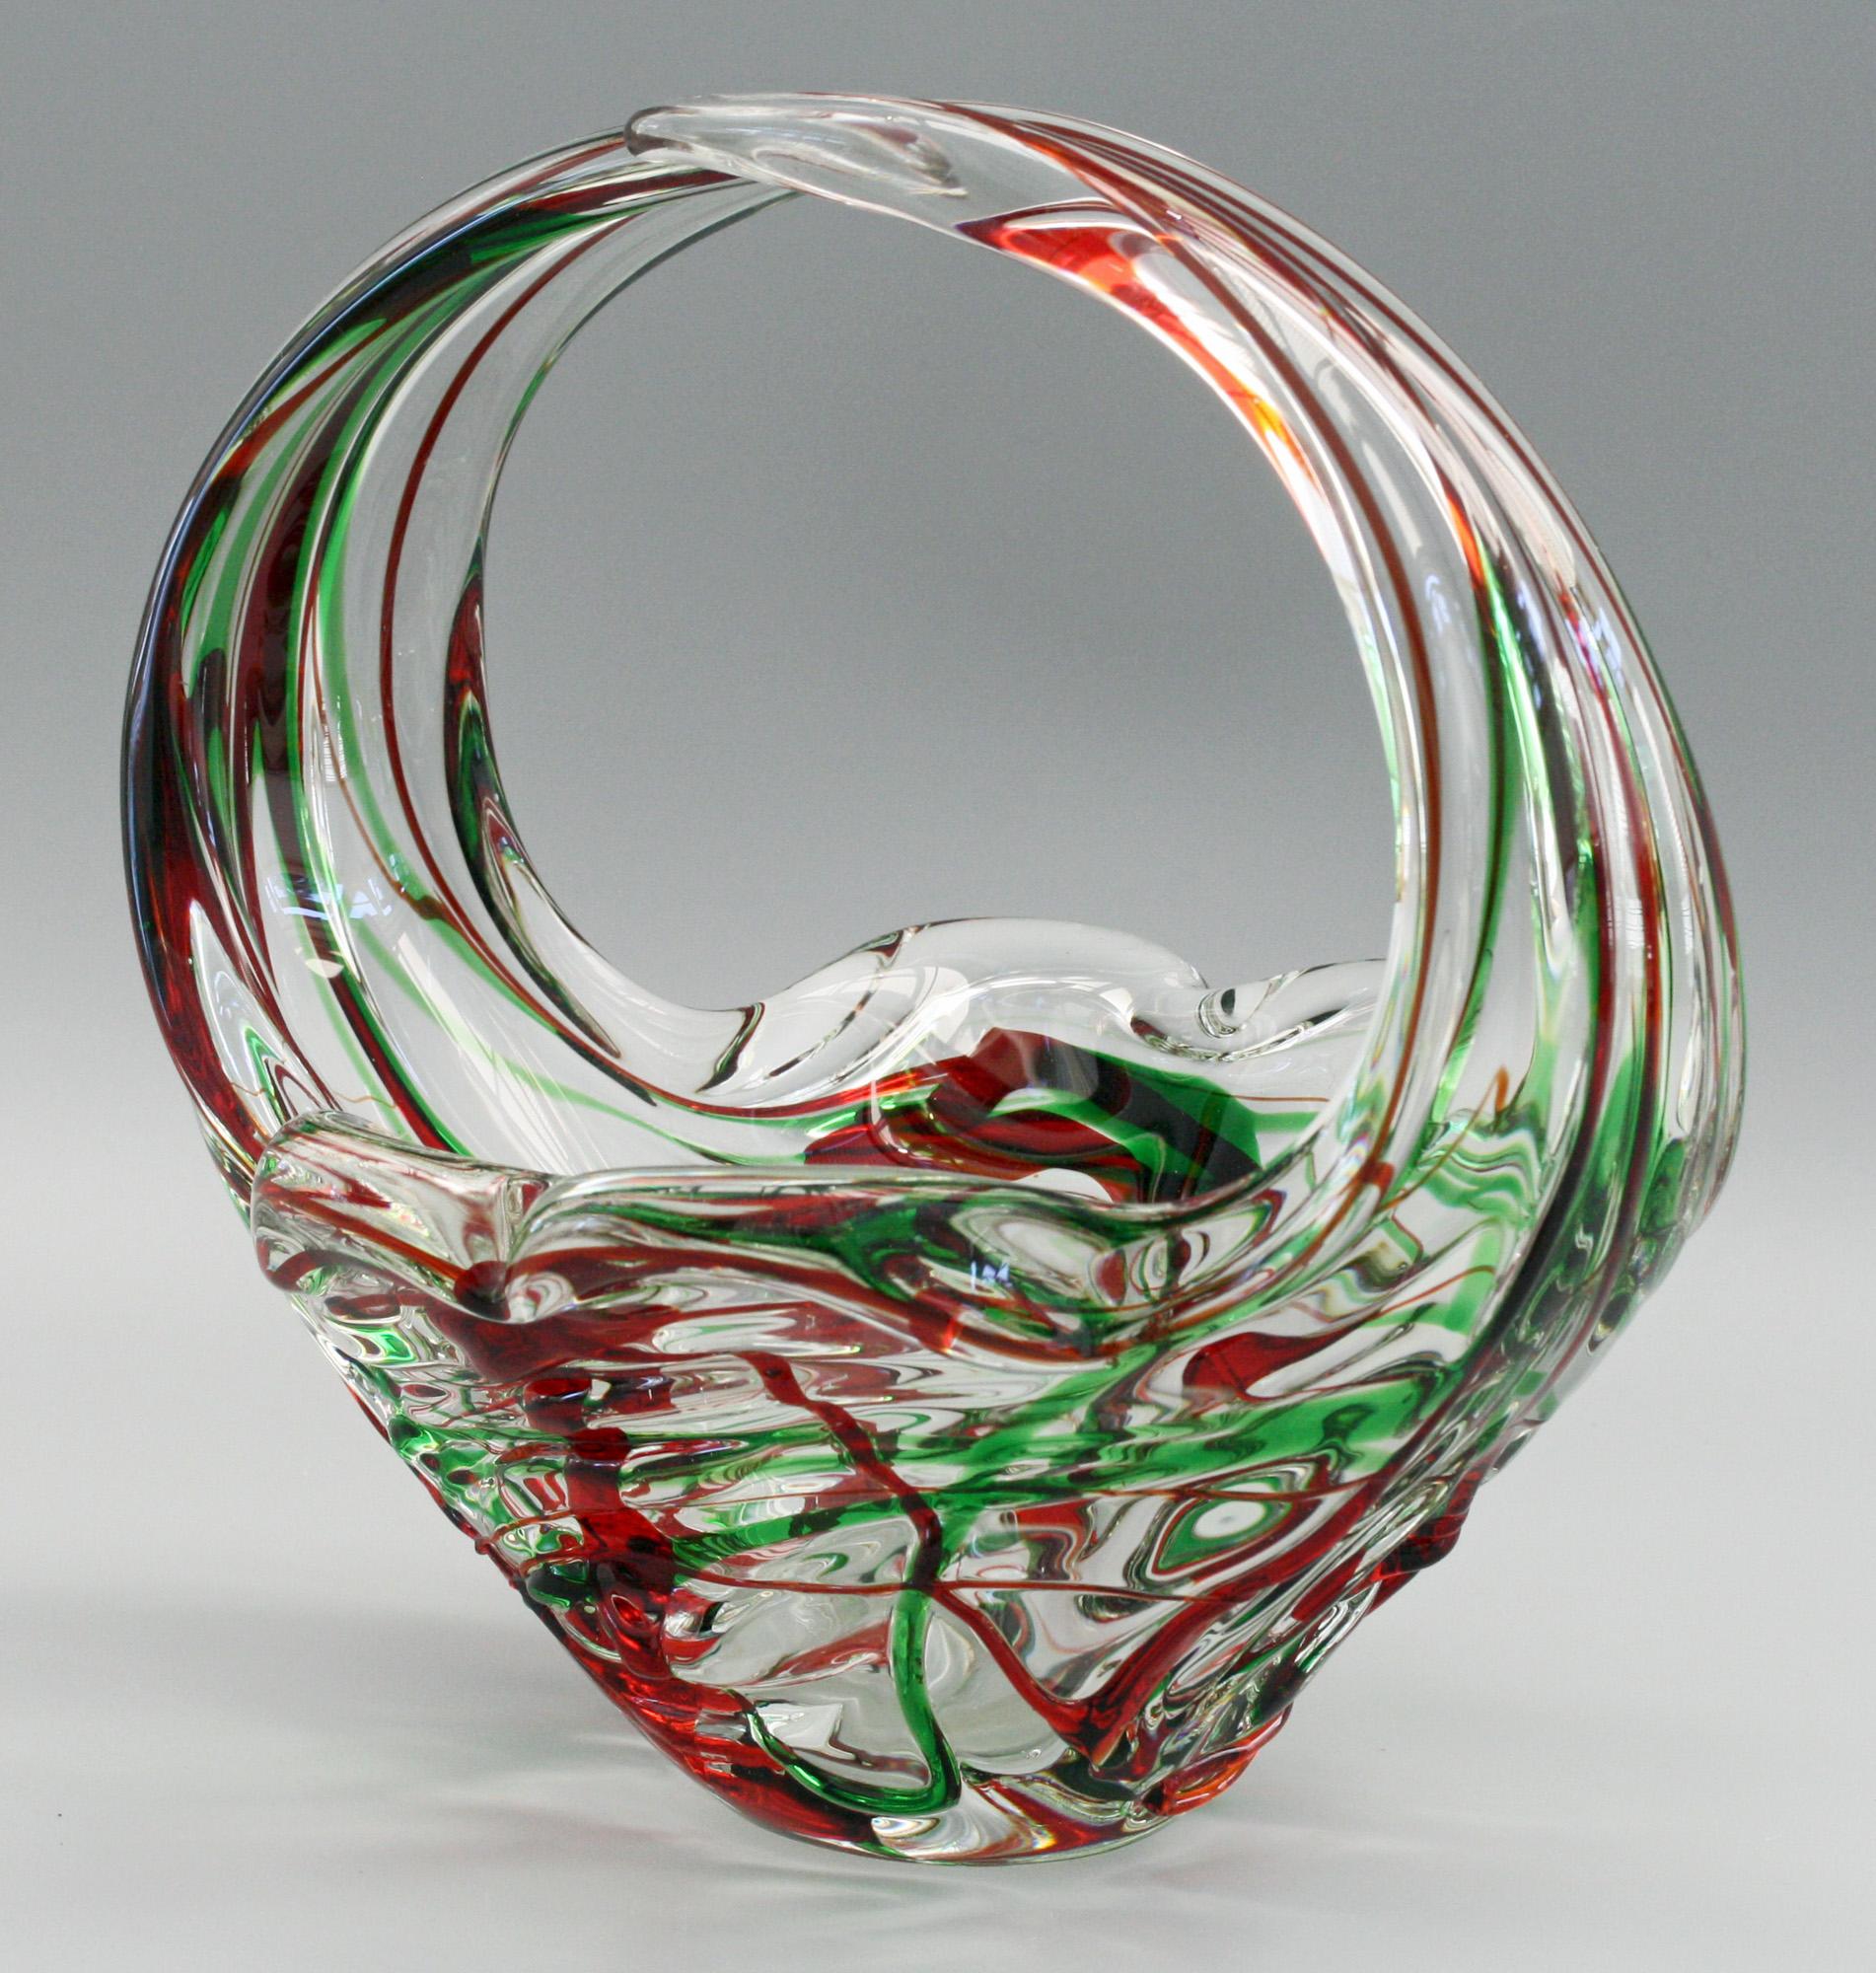 A very striking and stylish Italian Murano art glass basket shaped bowl with red and green trailing dating from the mid-20th century. The bowl is heavily moulded in clear glass has a flower shaped base with two raised overlapping loop handles. The